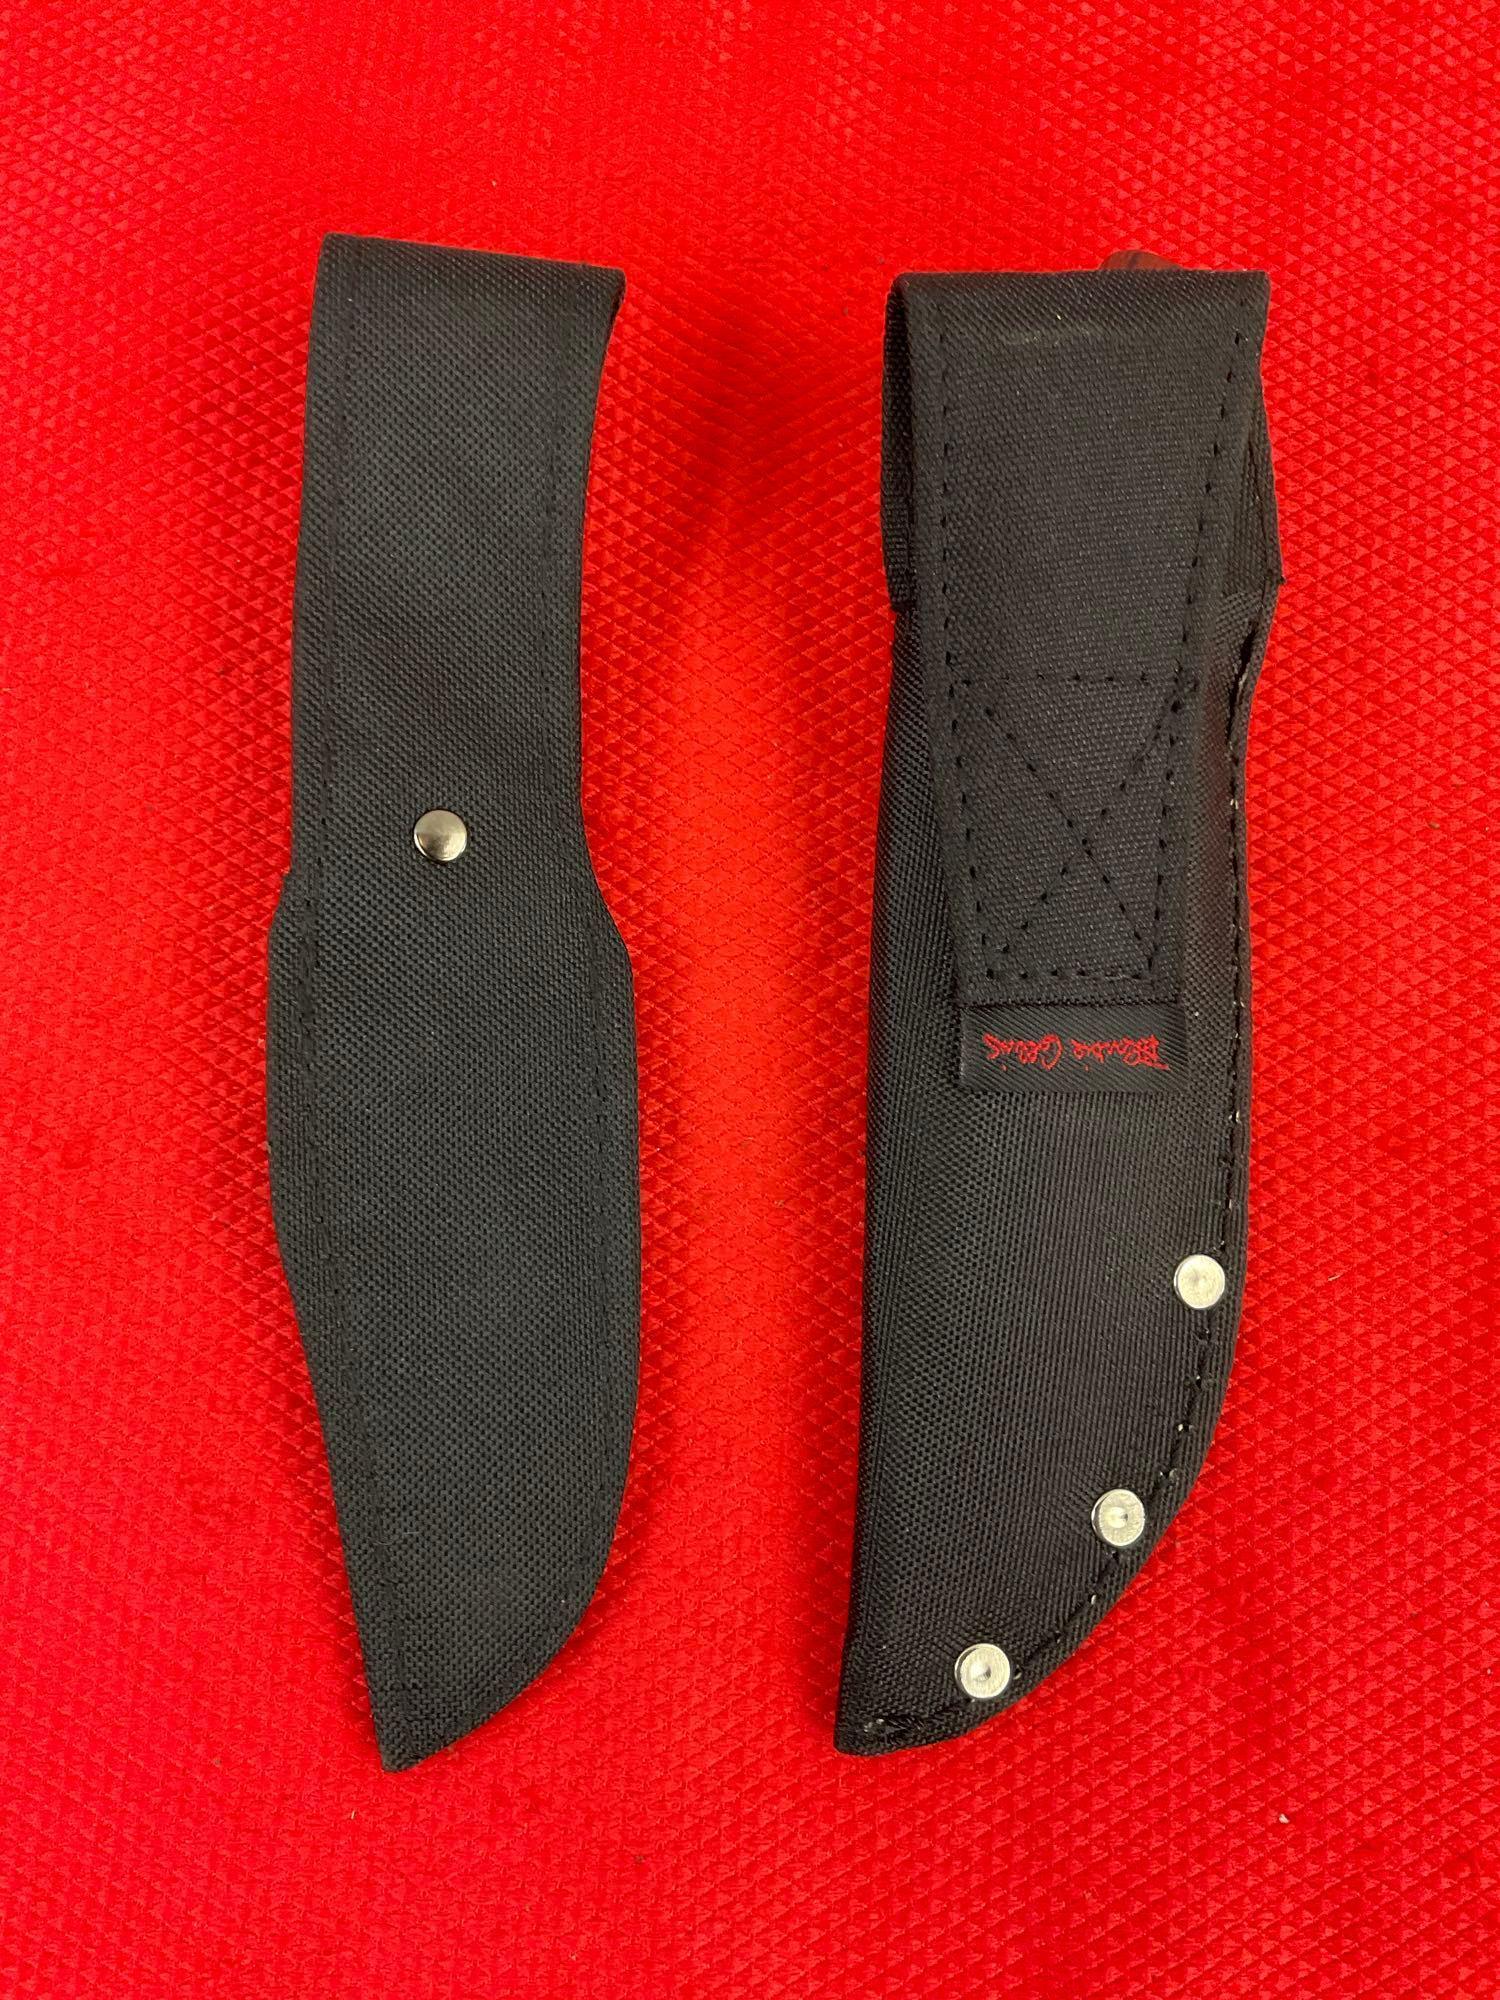 Pair of Winchester 3.5" Surgical Steel Fixed Blade Hunting Knives w/ Nylon Sheathes. See pics.